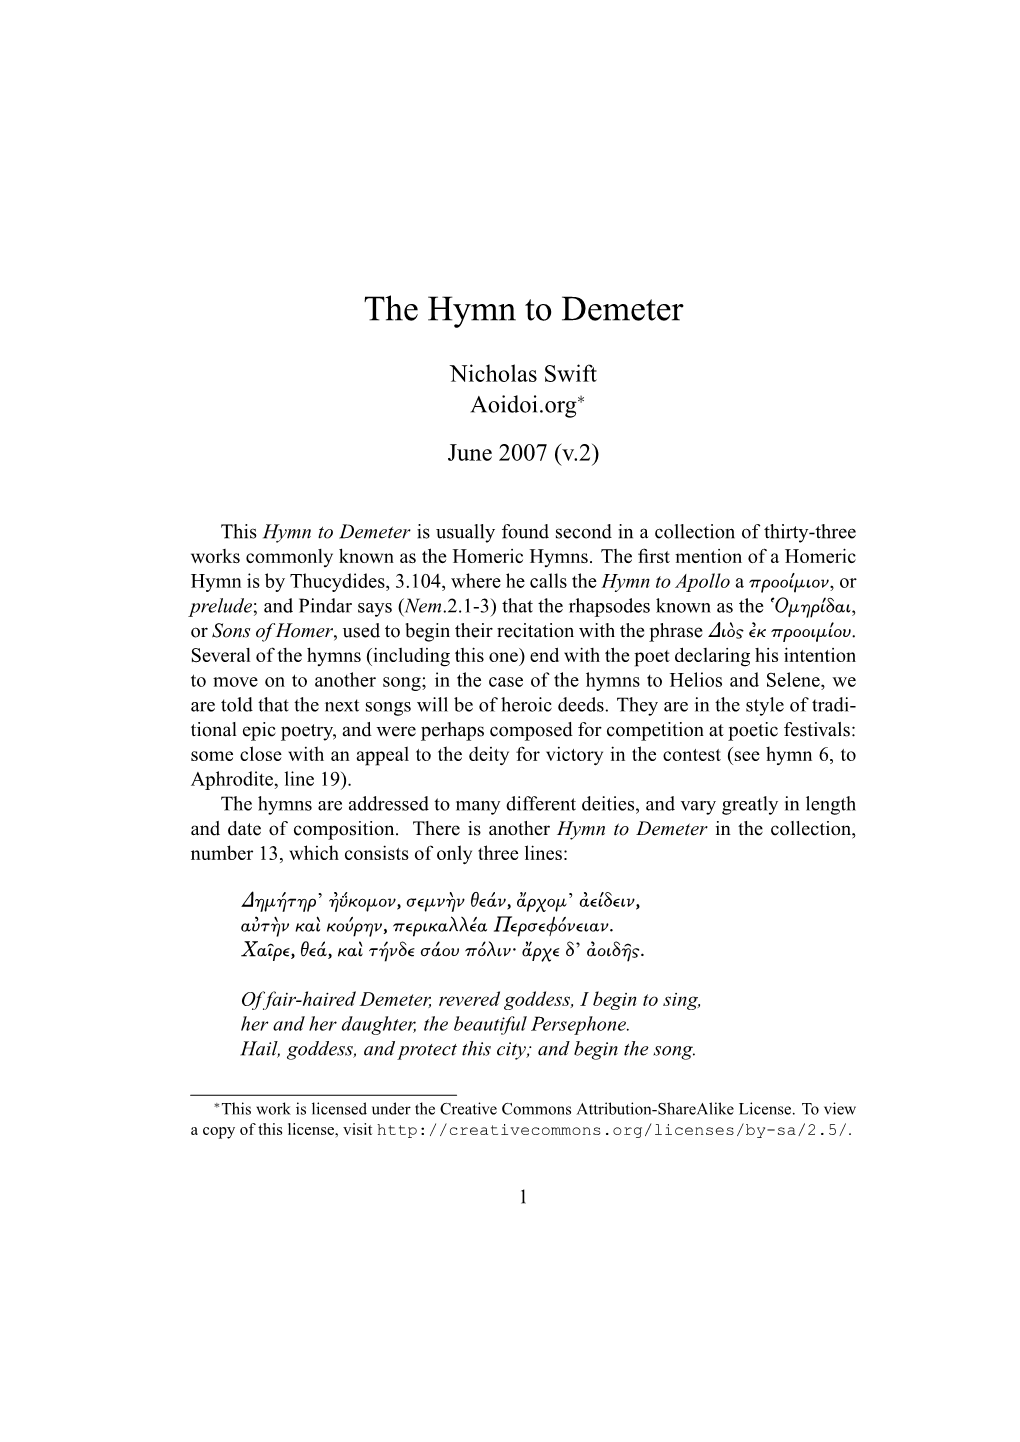 The Hymn to Demeter